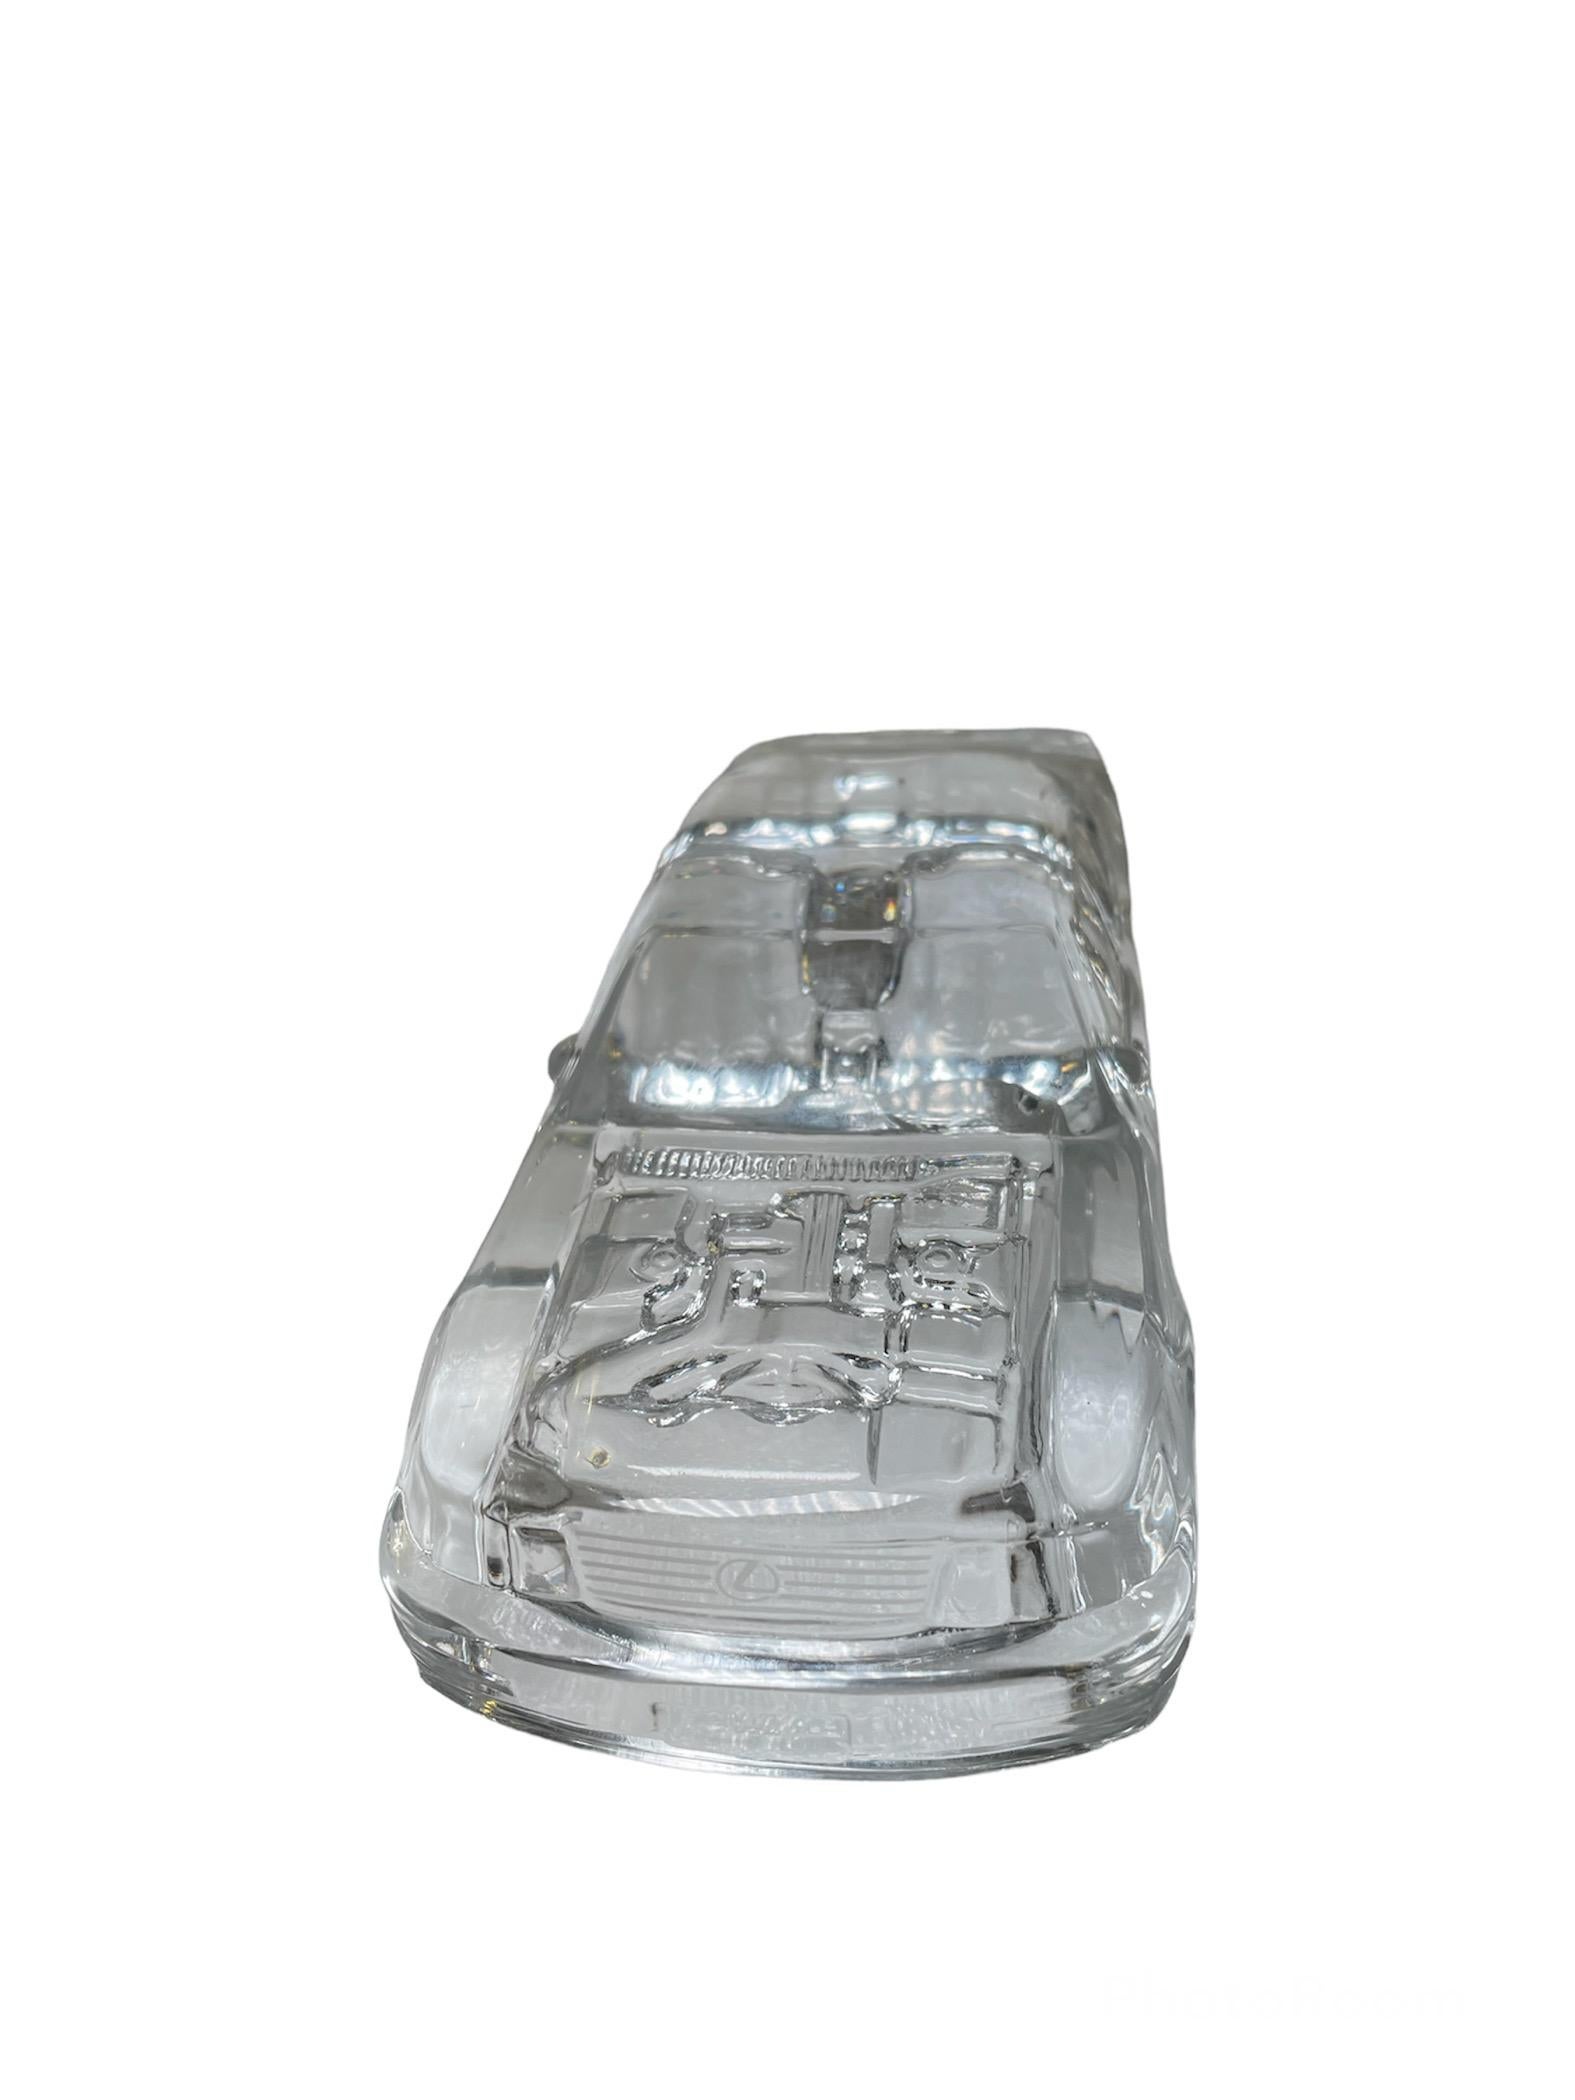 1989-90’s Clear Crystal Lexus LS 400 Car Paperweight For Sale 1